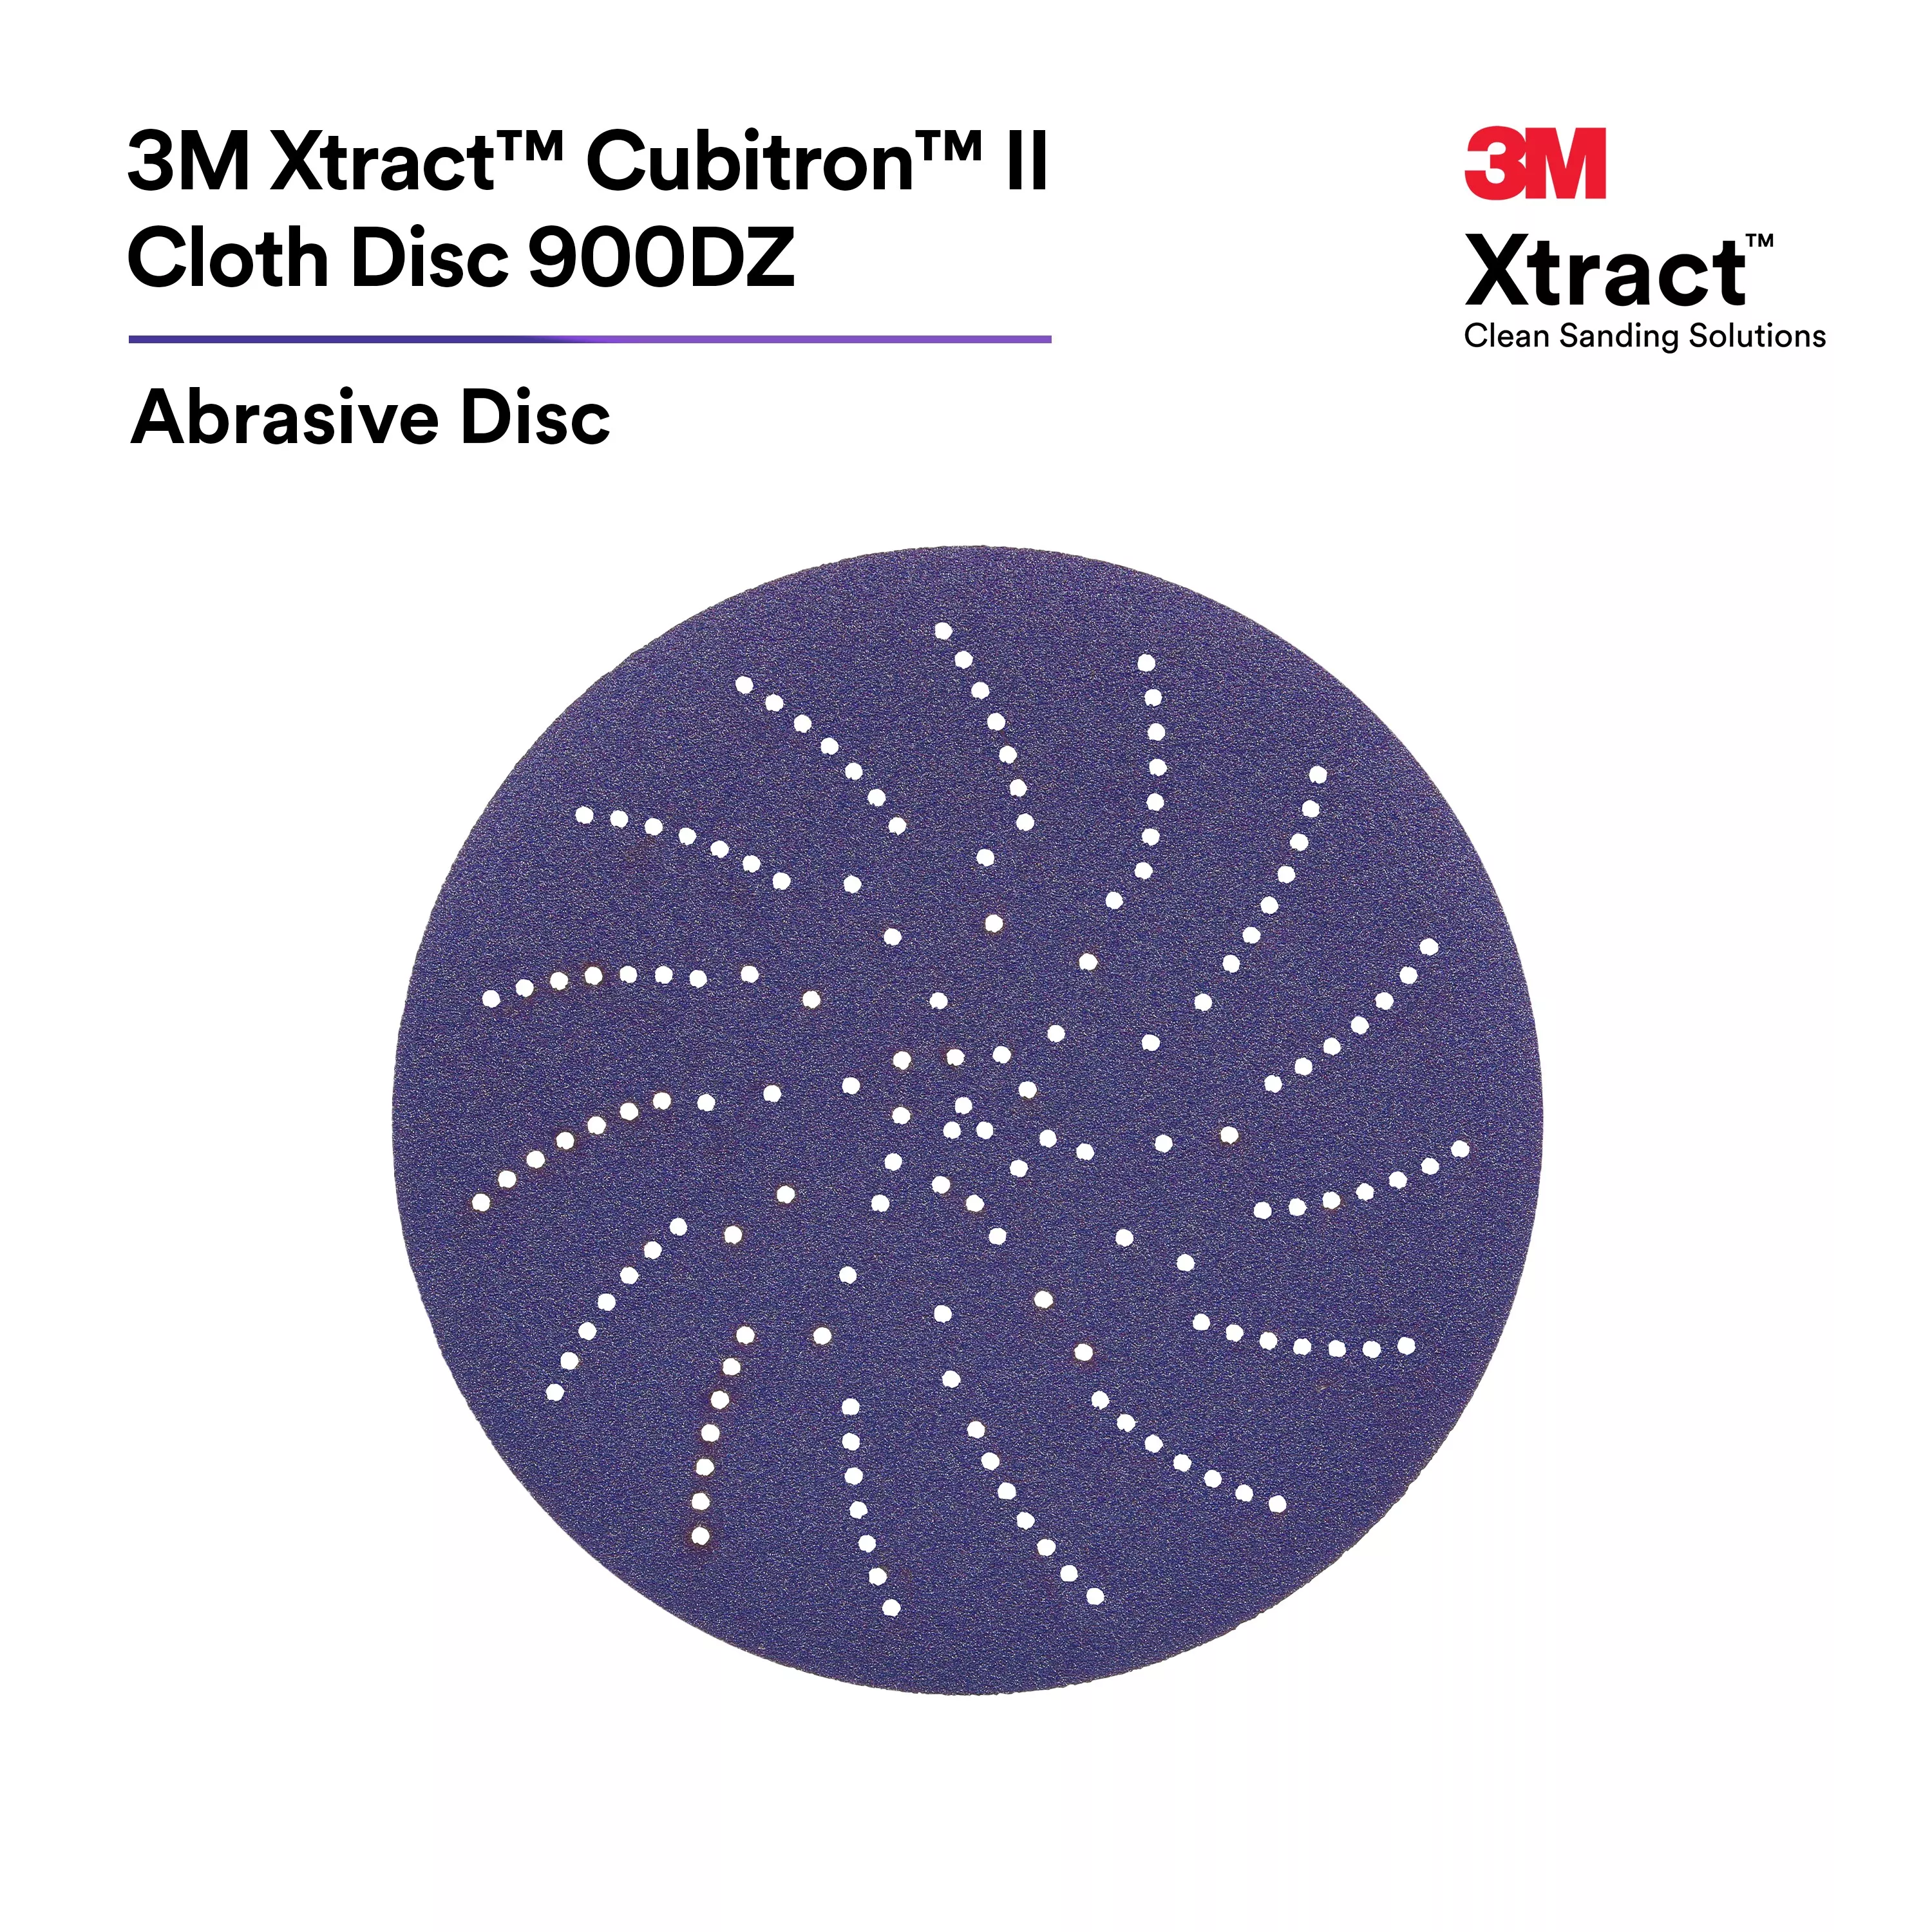 3M Xtract™ Cubitron™ II Cloth Disc 900DZ, 65996, 40 + to 320+, J-weight, 5 in, Die 500LG, 10 ea/Case, Trial Pack